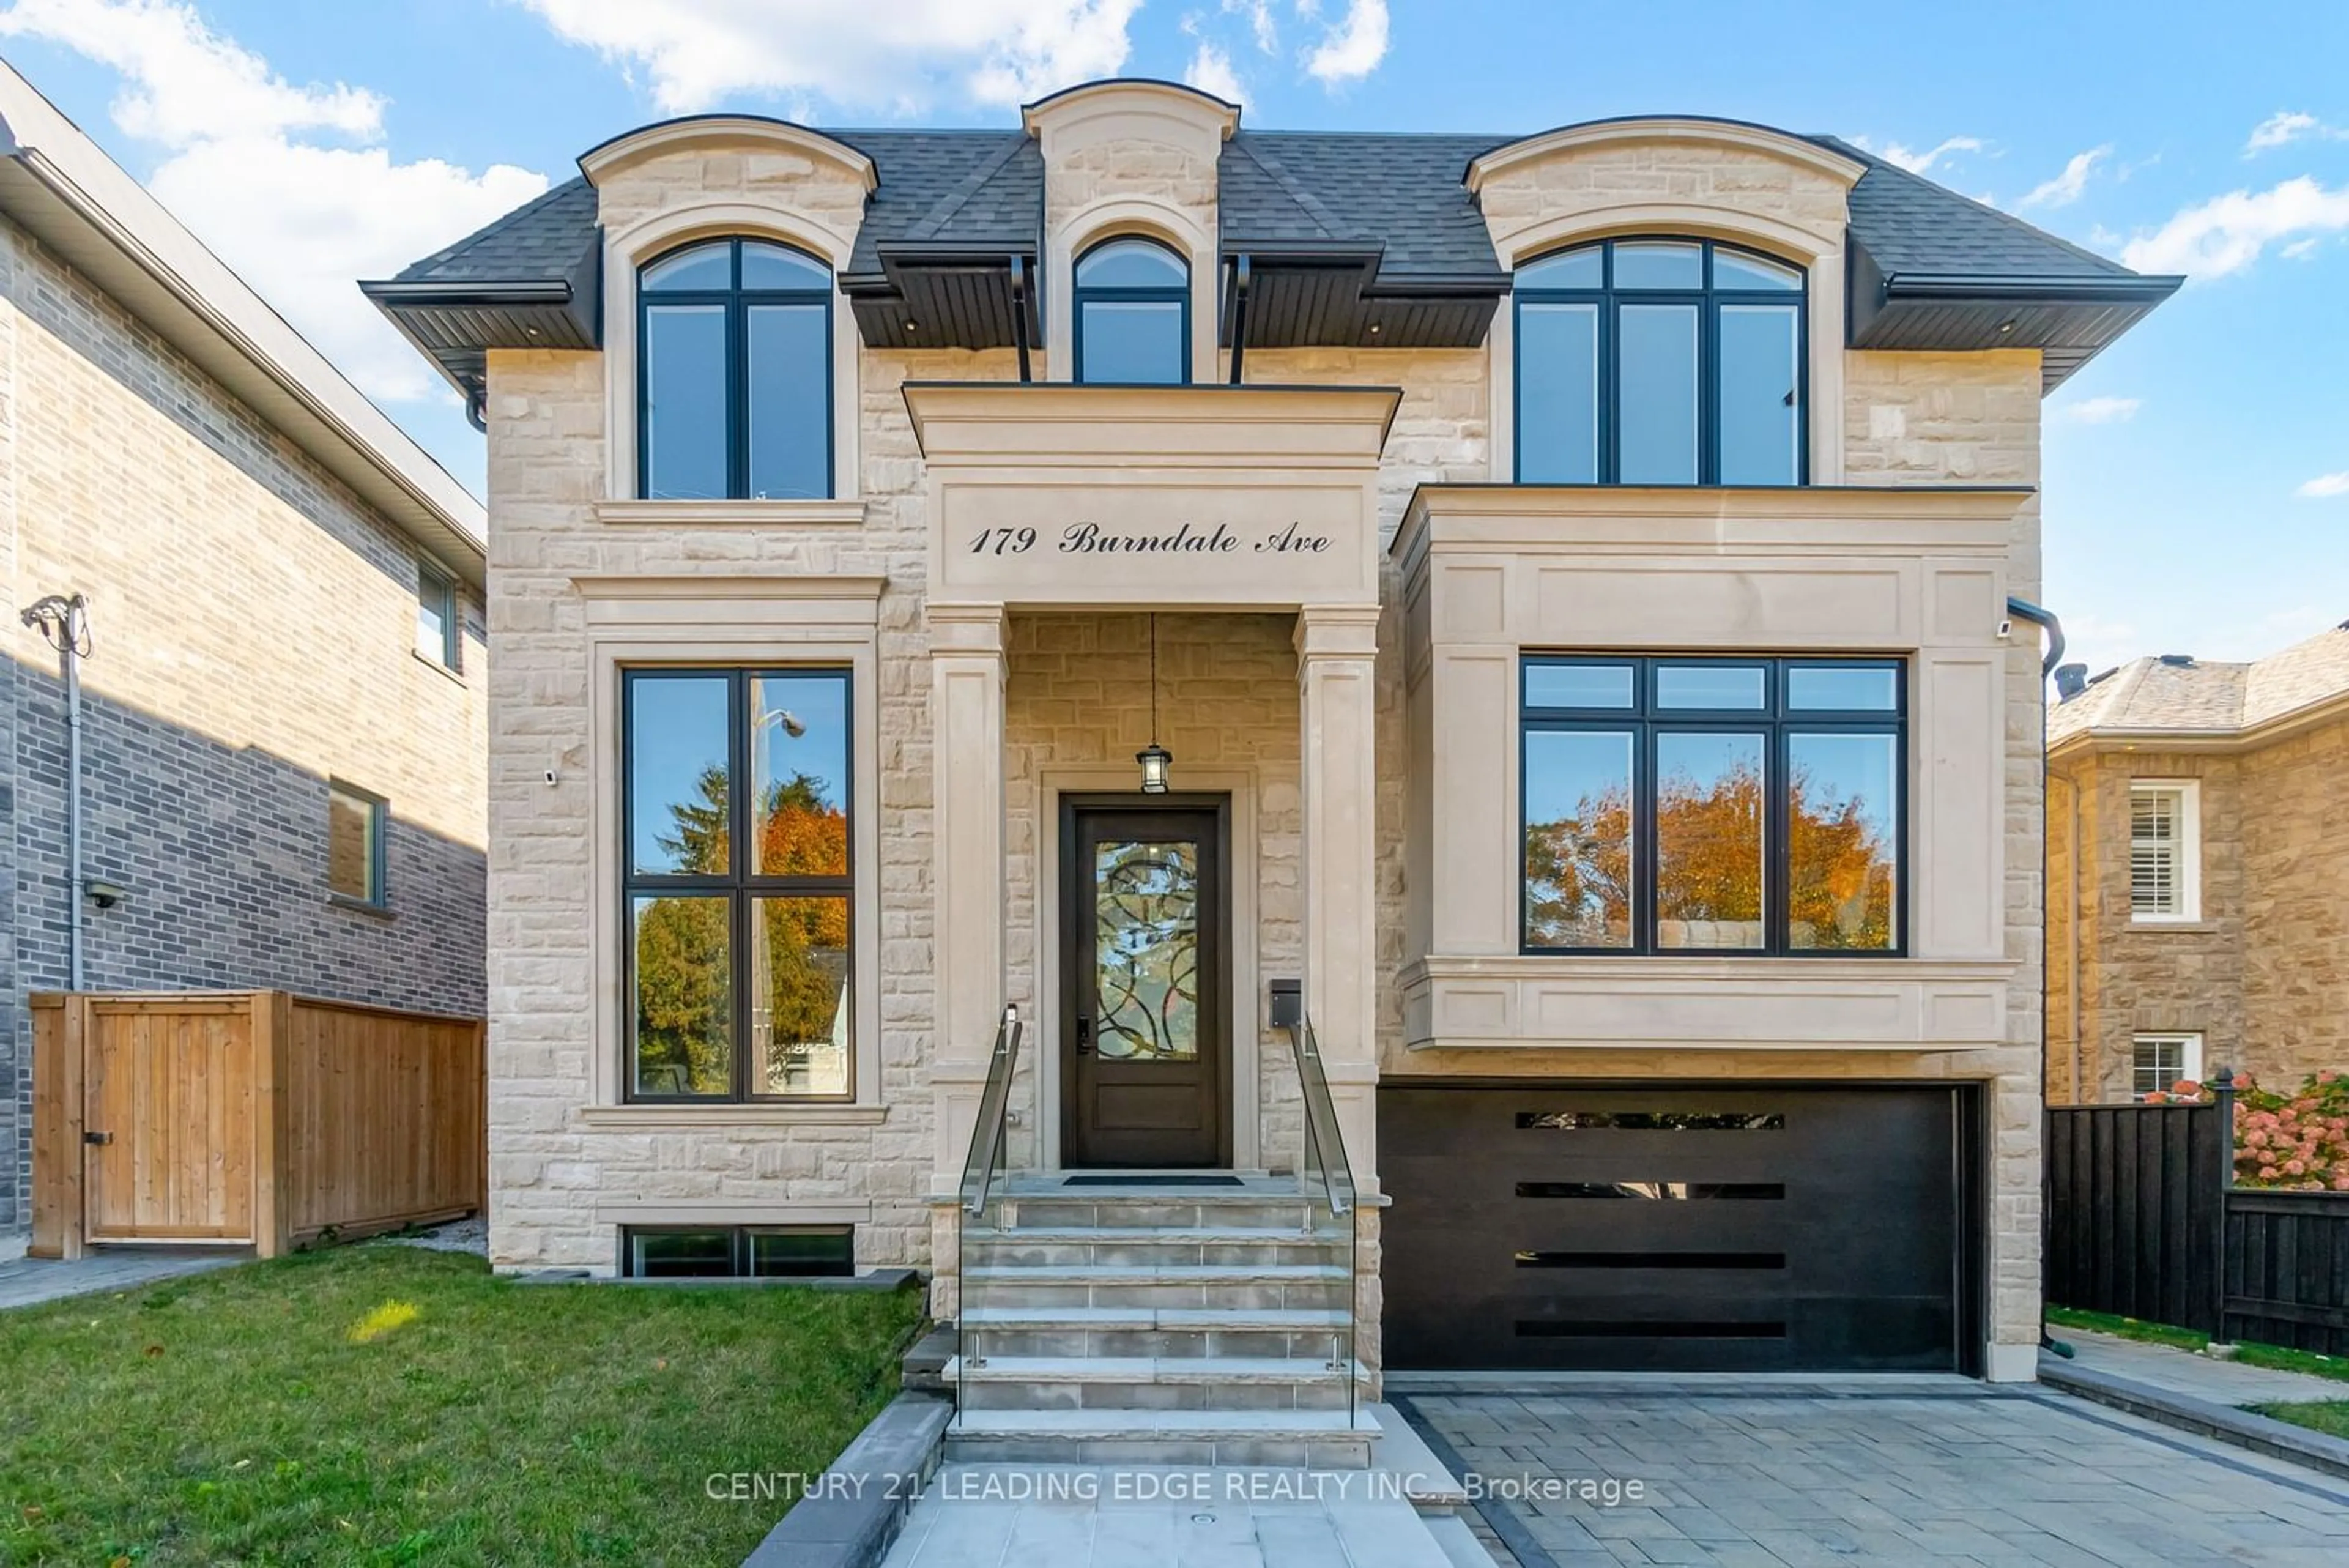 Home with brick exterior material for 179 Burndale Ave, Toronto Ontario M2N 1T1